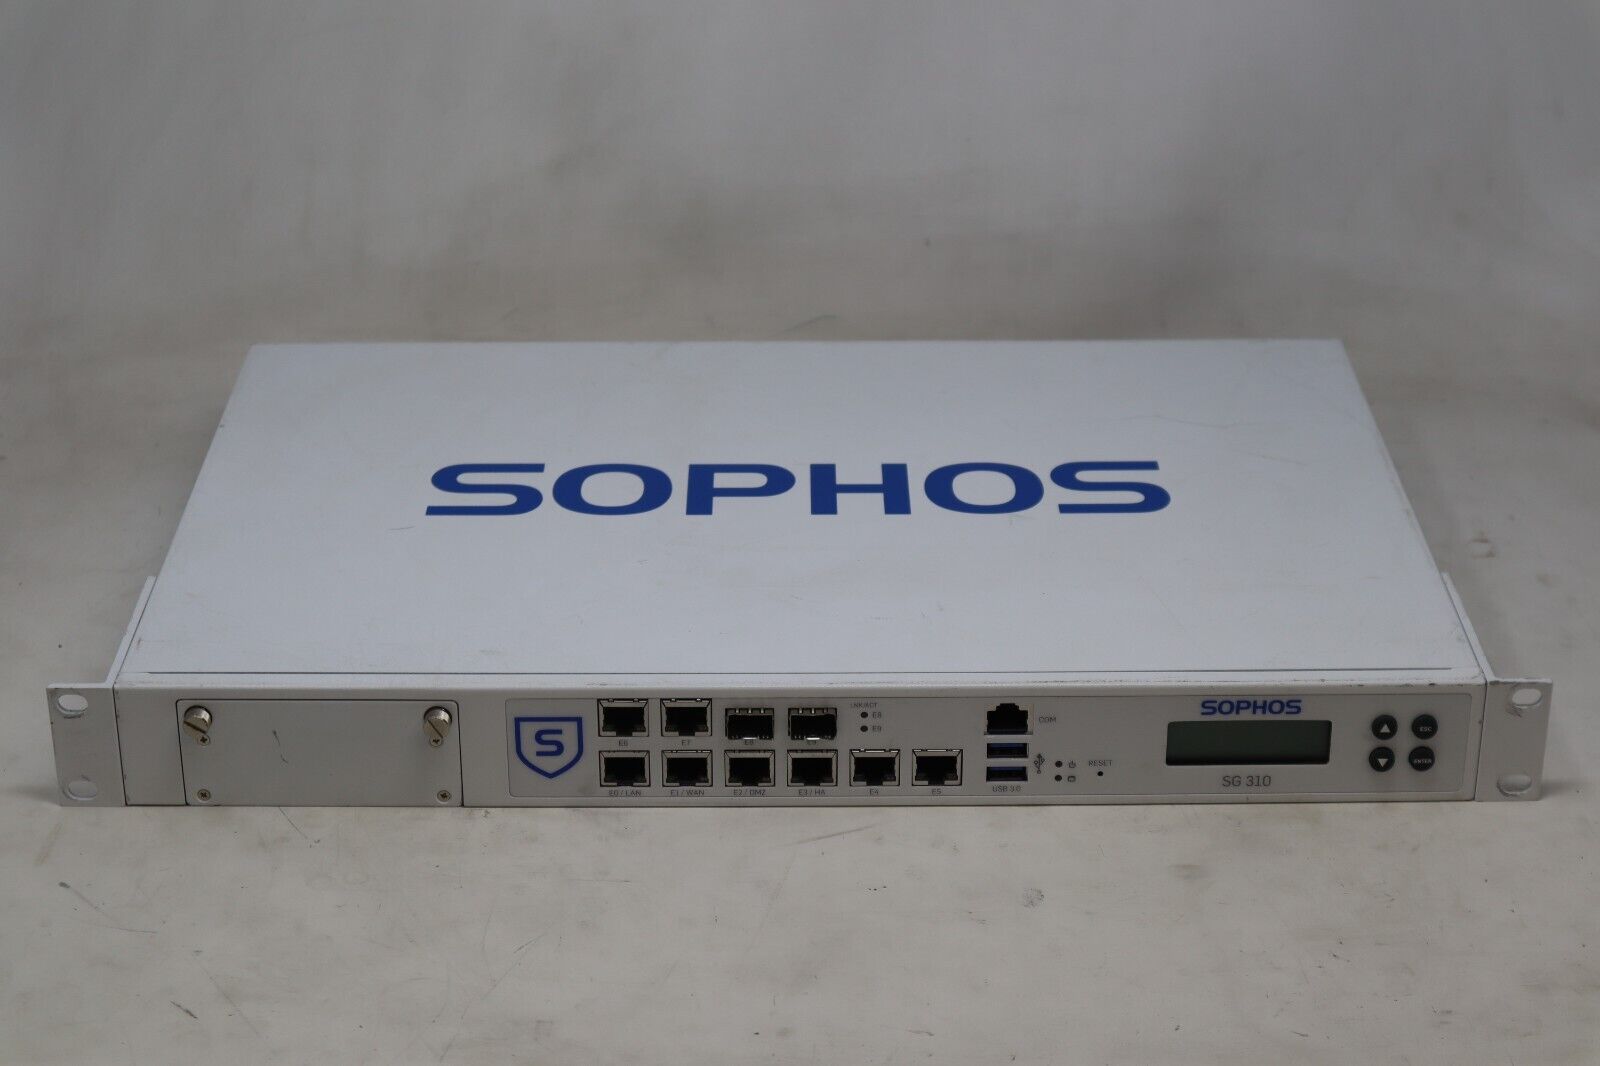 Sophos SG 310 Firewall Security Appliance | Factory Reset | A/C Adapter Included